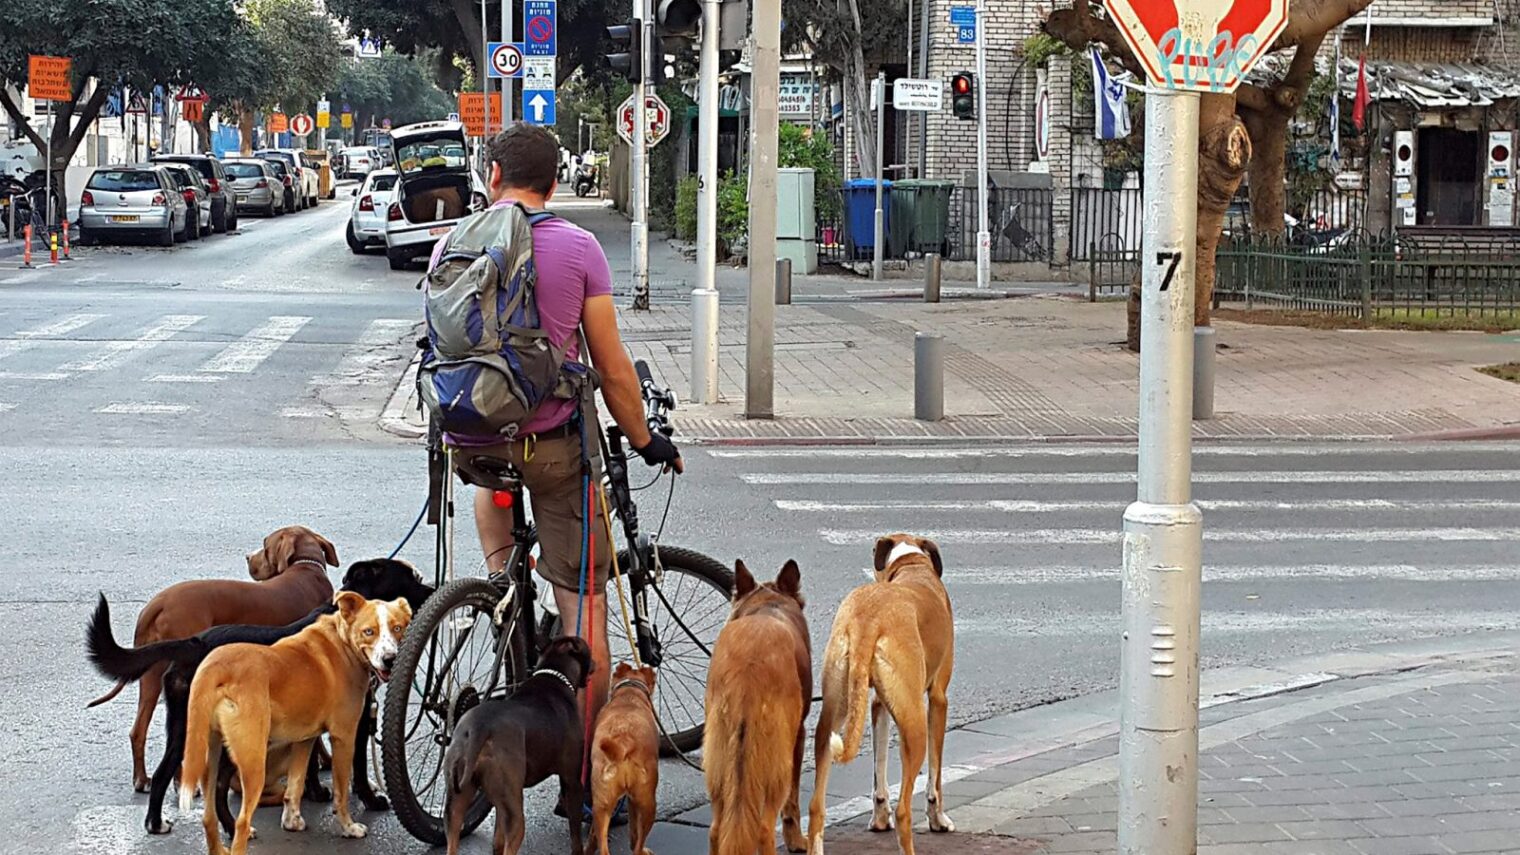 And there are also people like this. Tel Aviv dog-walker. Photo by FLASH90